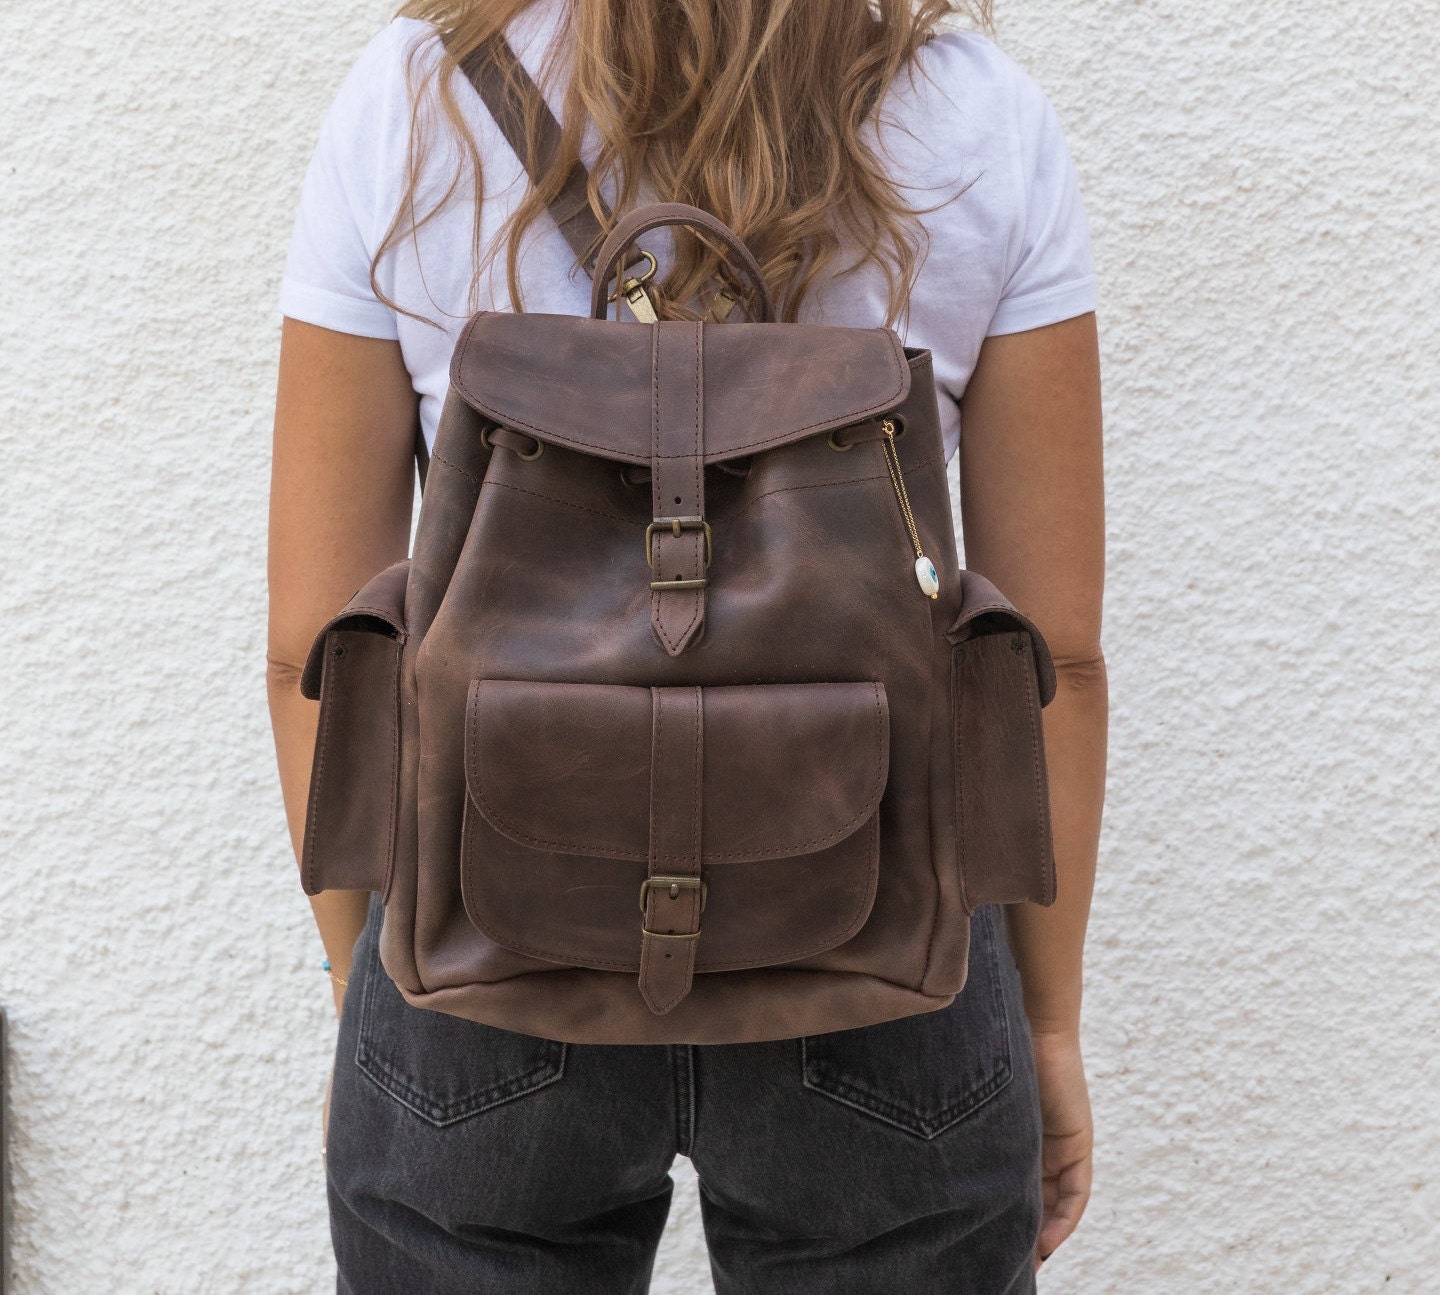 Women's Leather Backpack Brown Backpack Travel Bag Gift - Etsy Canada